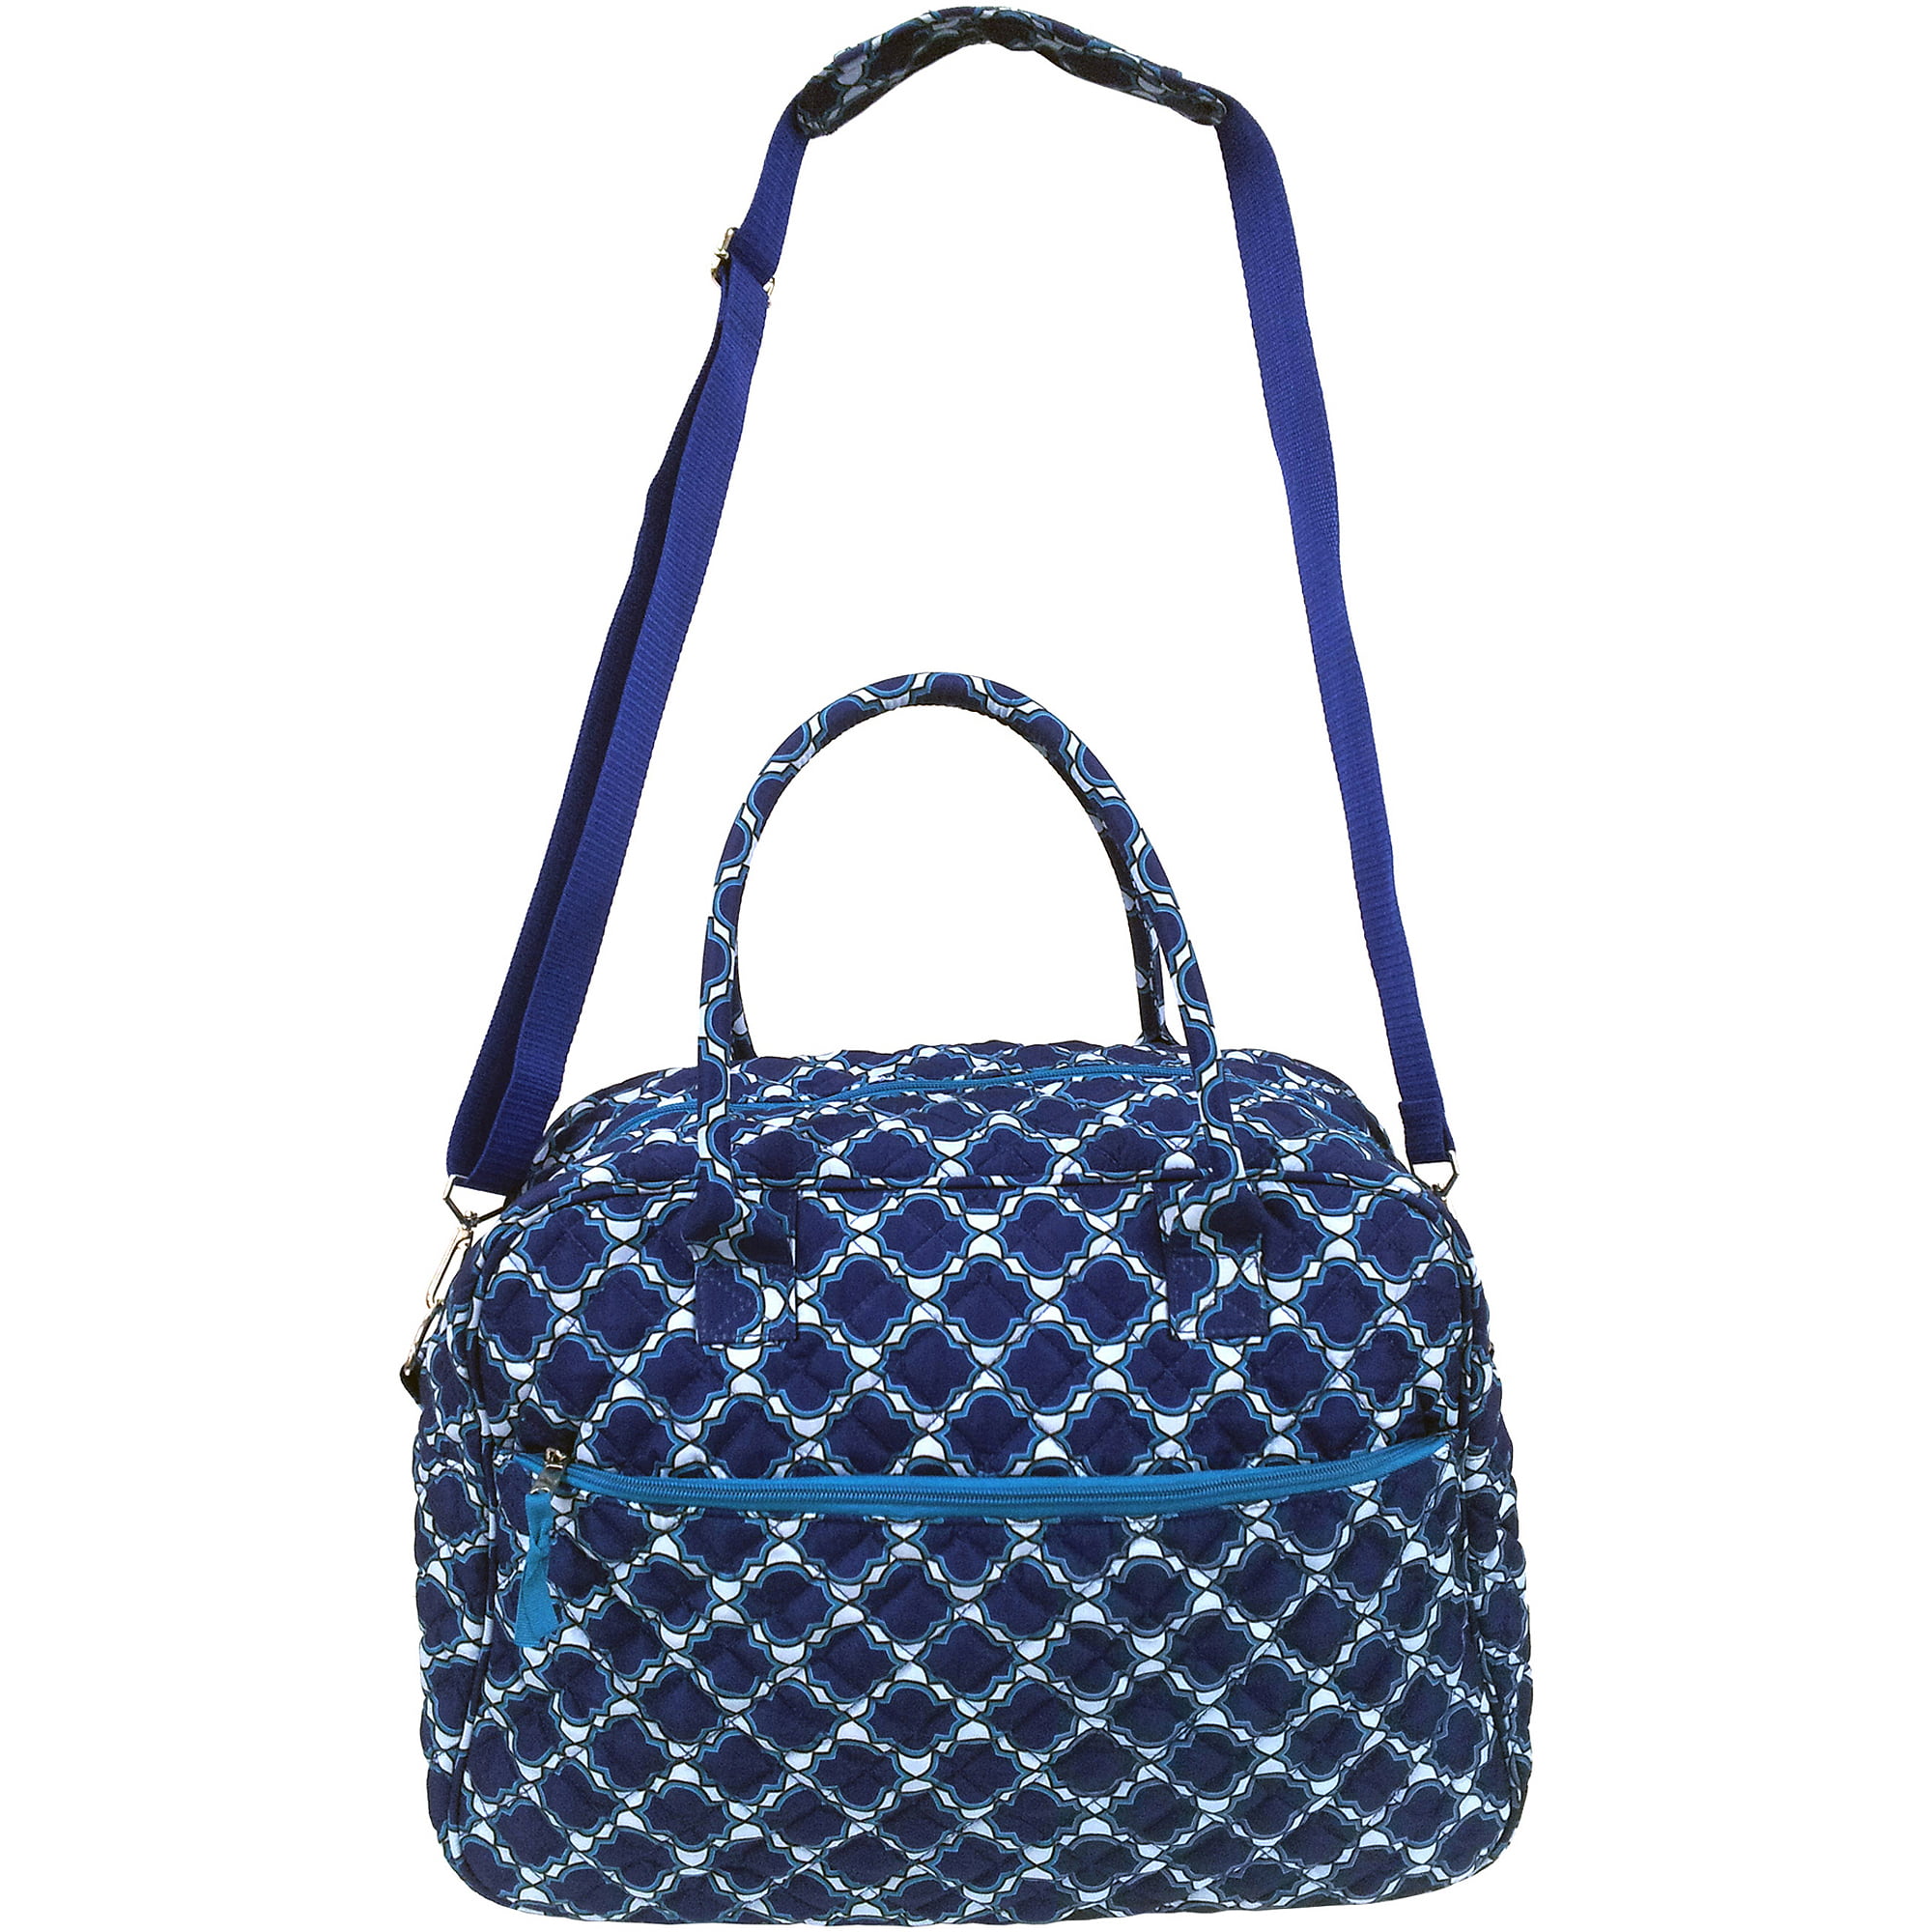 Generic Quilted Duffel Bag, Blue Tile - 0 - 0